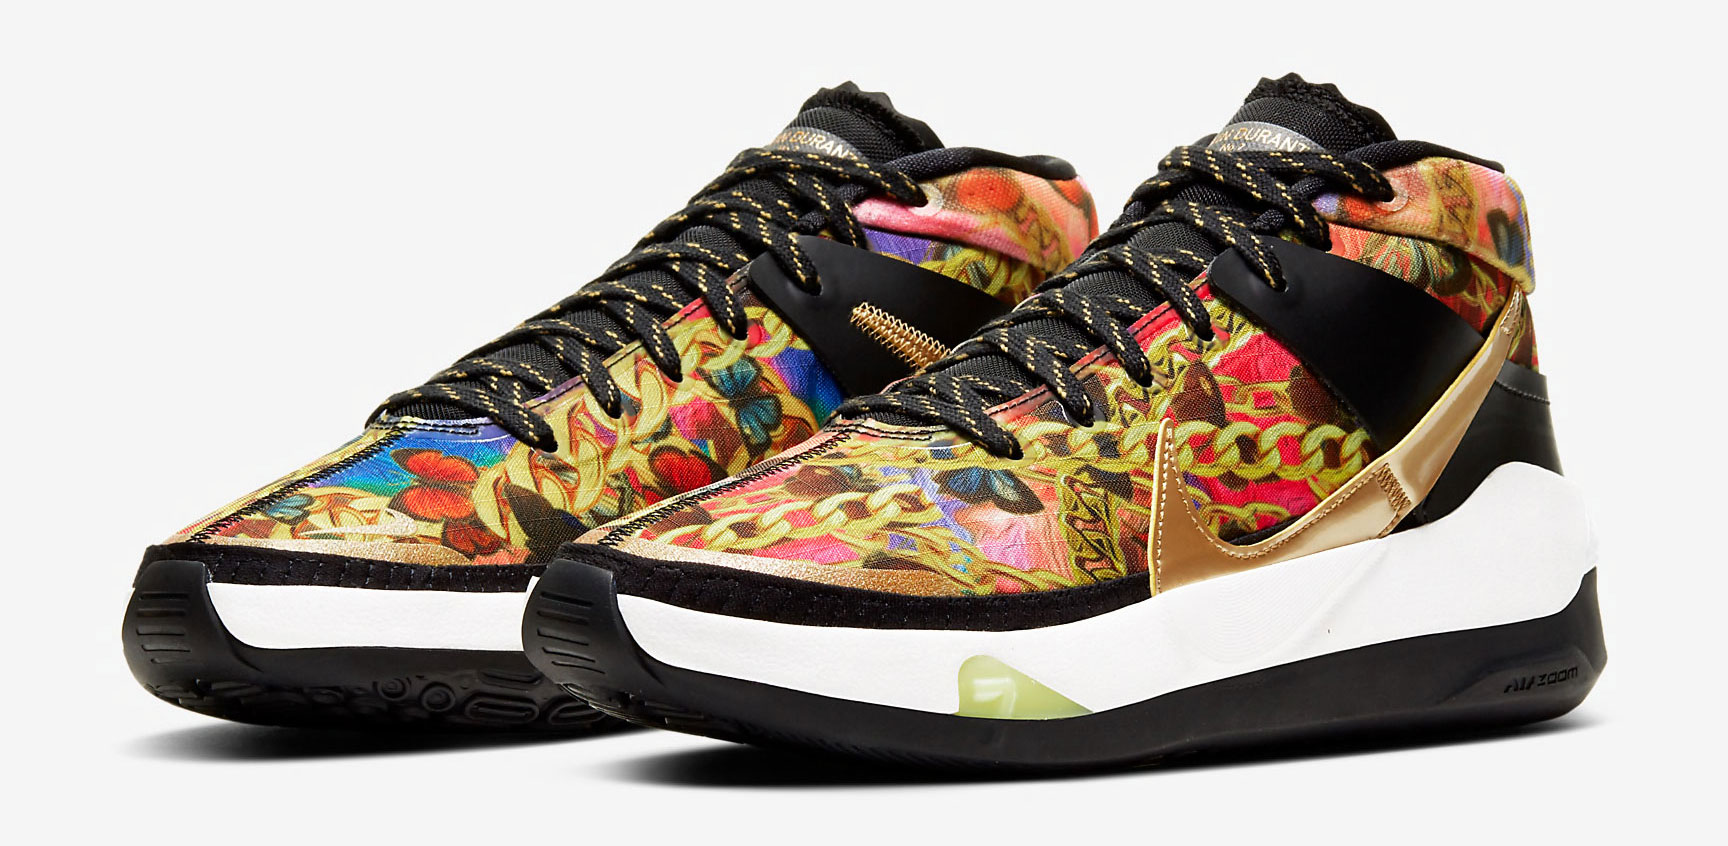 nike-kd-13-butterflies-and-chains